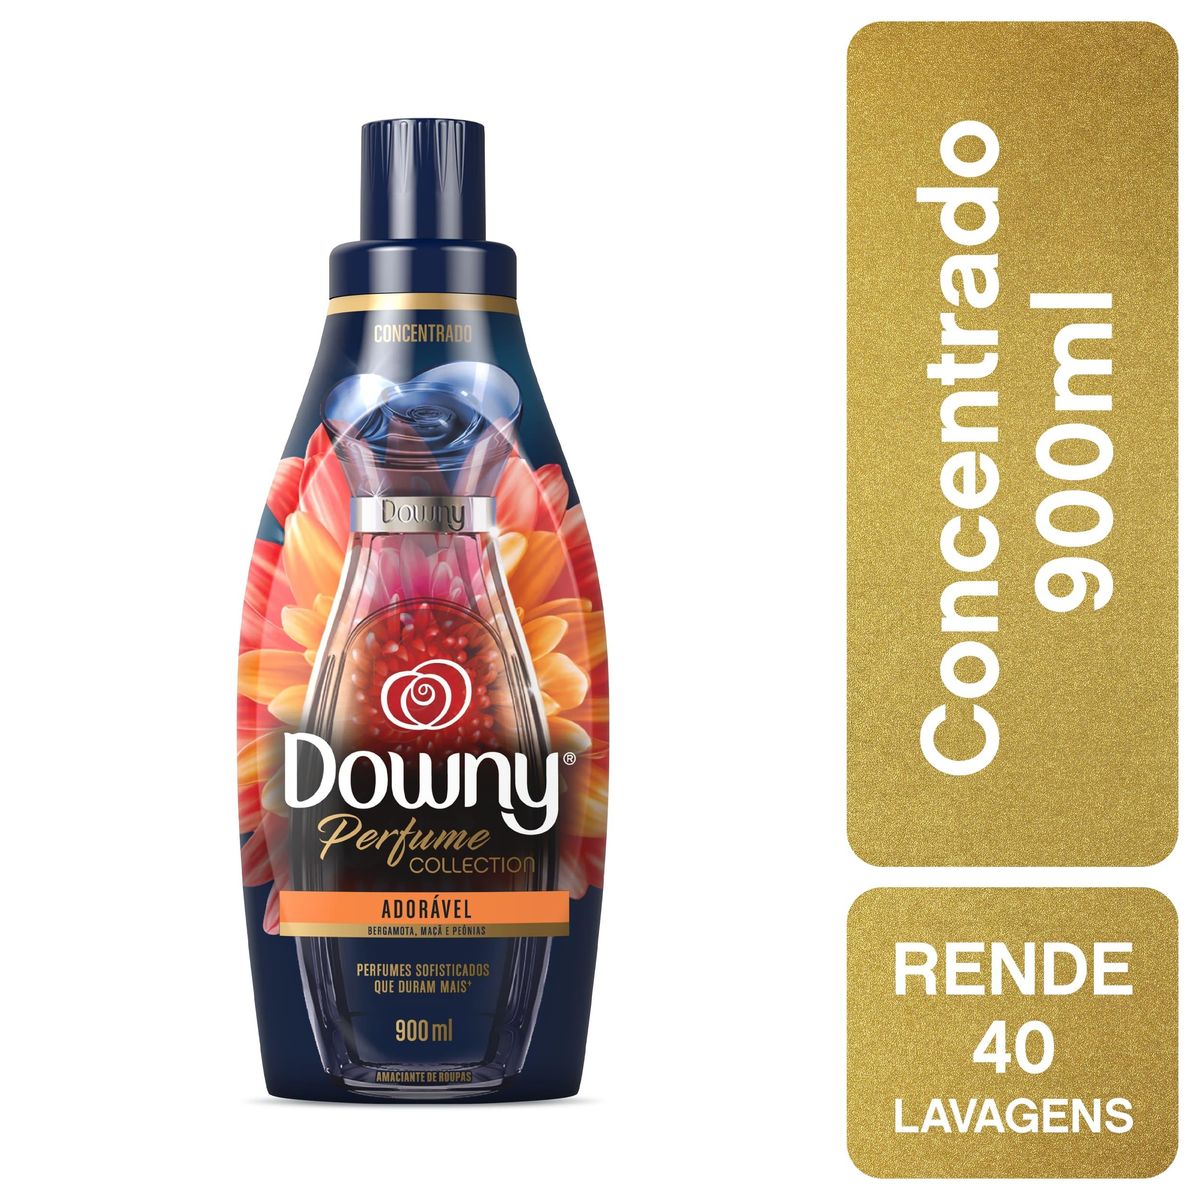 Amaciante Conc. Downy Perfume Collection Adorável 900ml image number 1